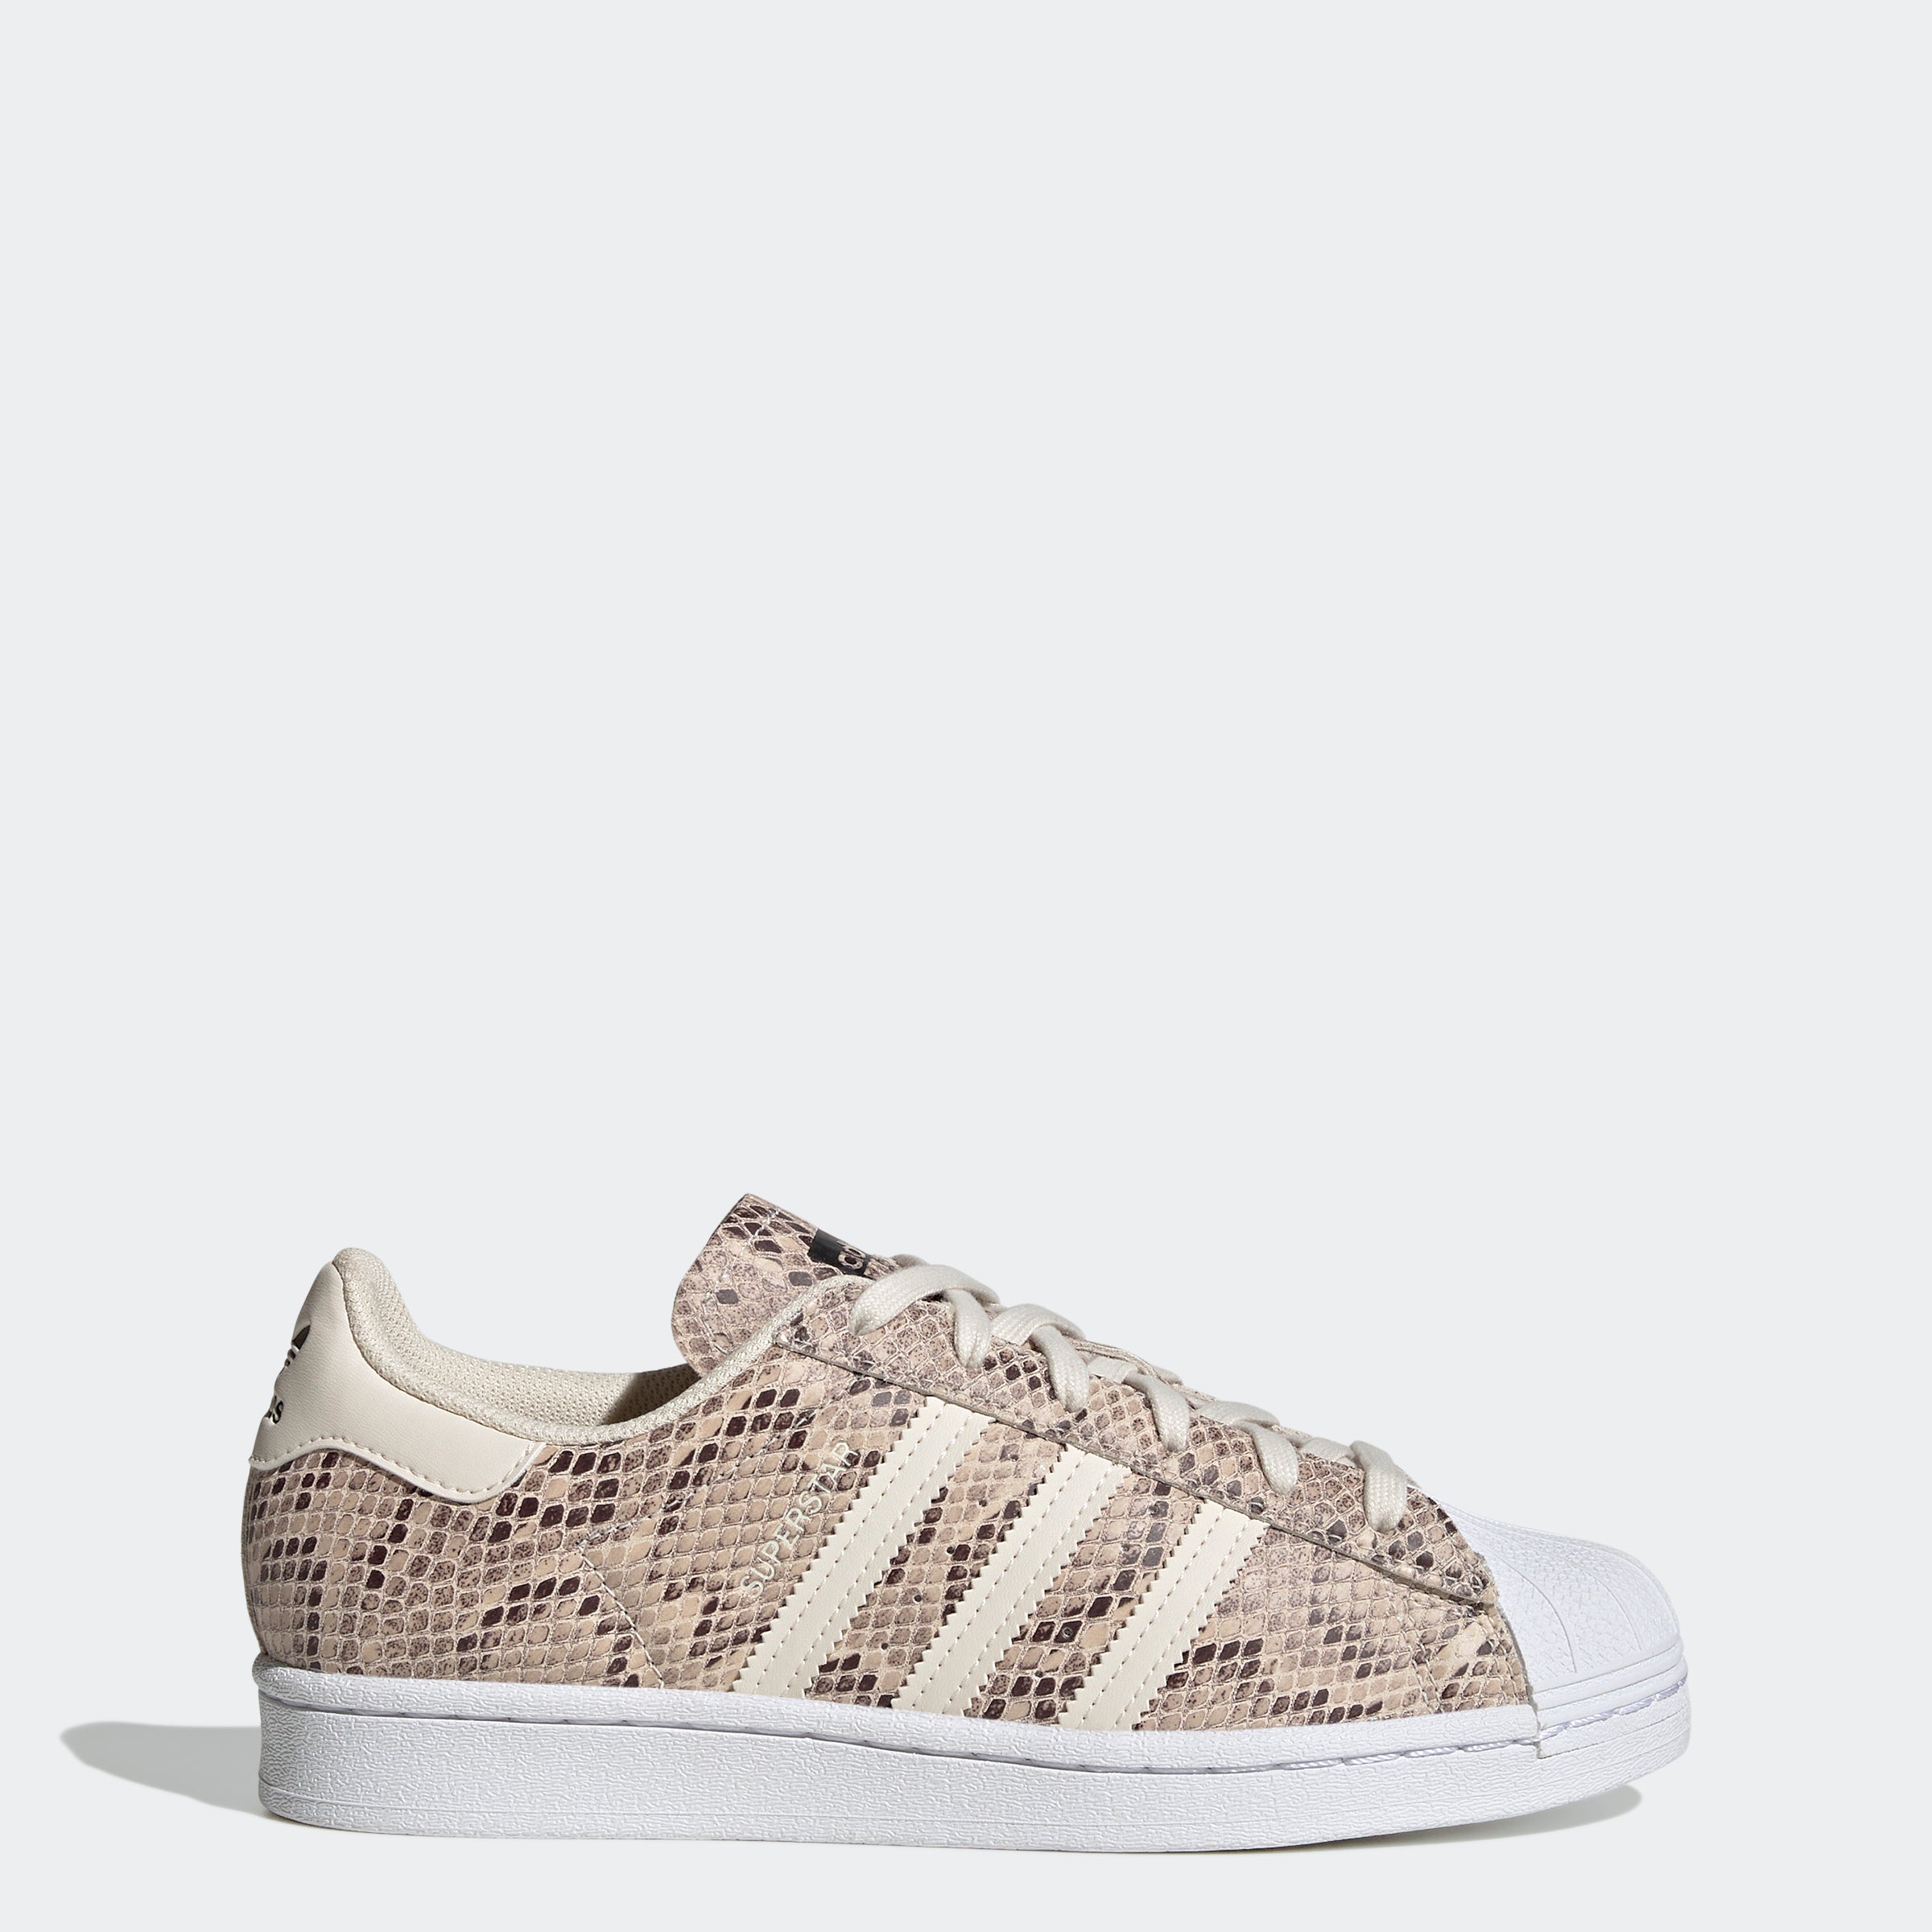 adidas Superstar Shoes Snakeskin GW2192 Chicago City Sports